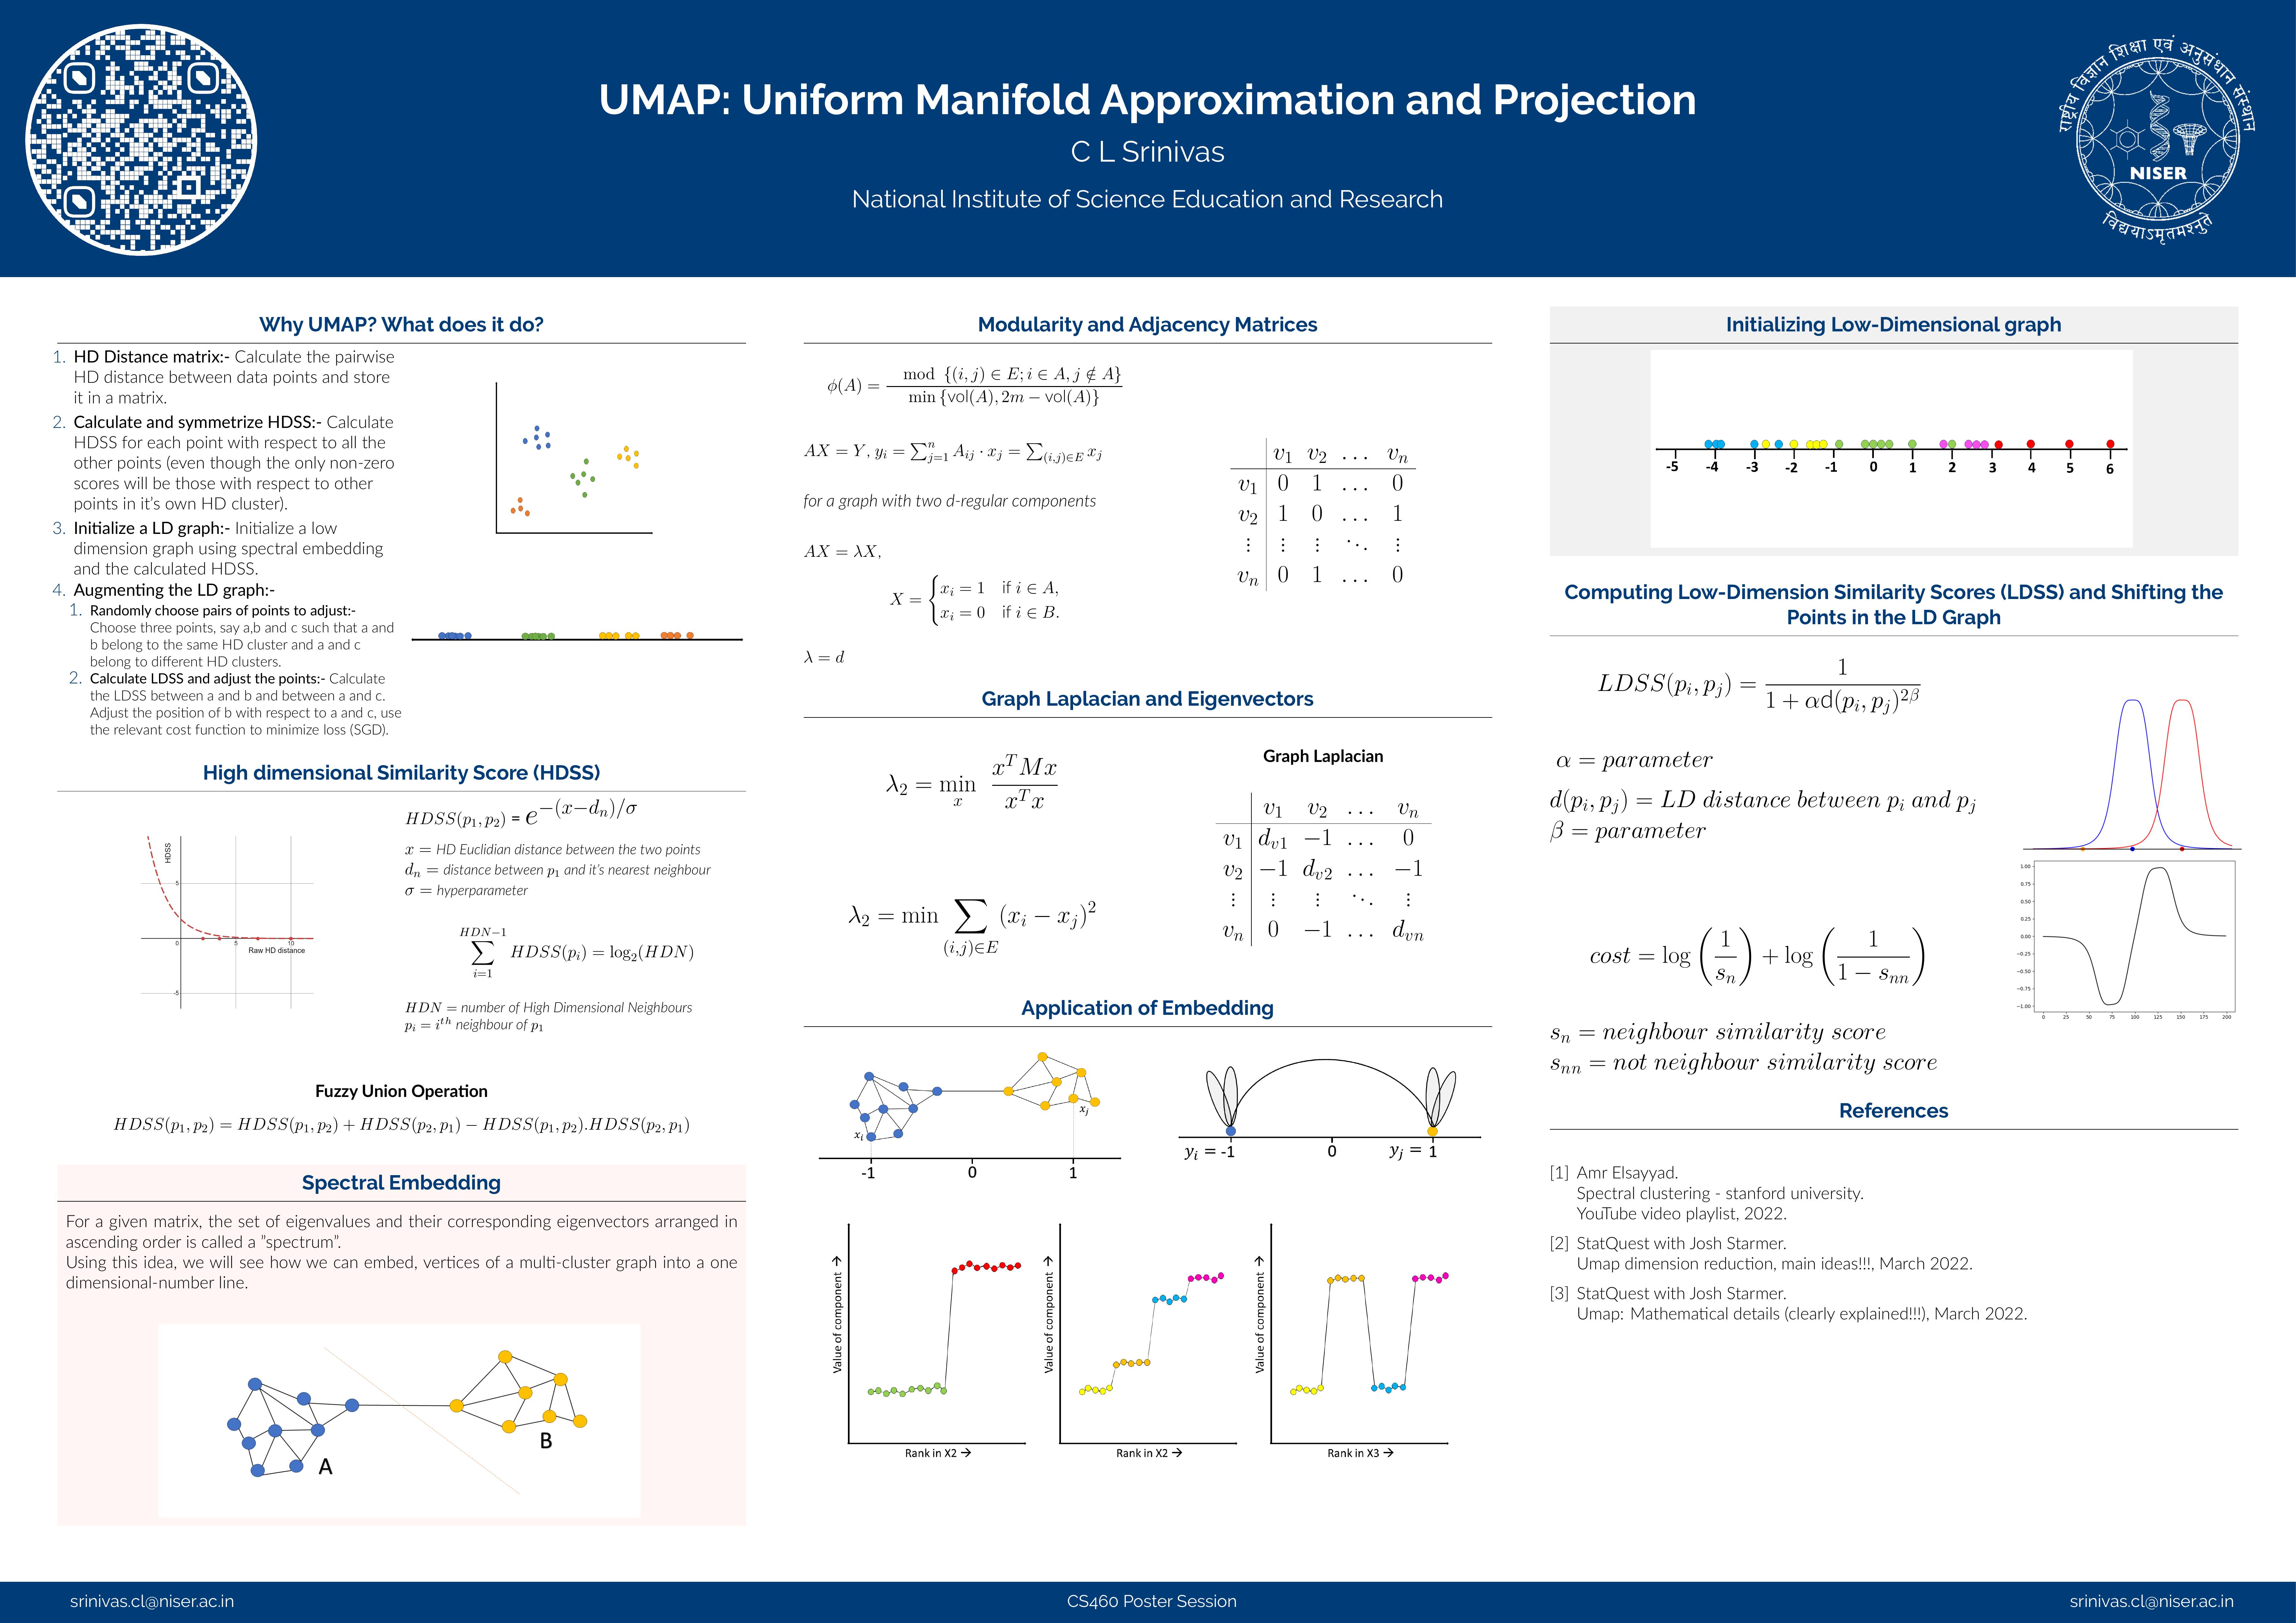 Uniform Manifold Approximation and Projection (UMAP)